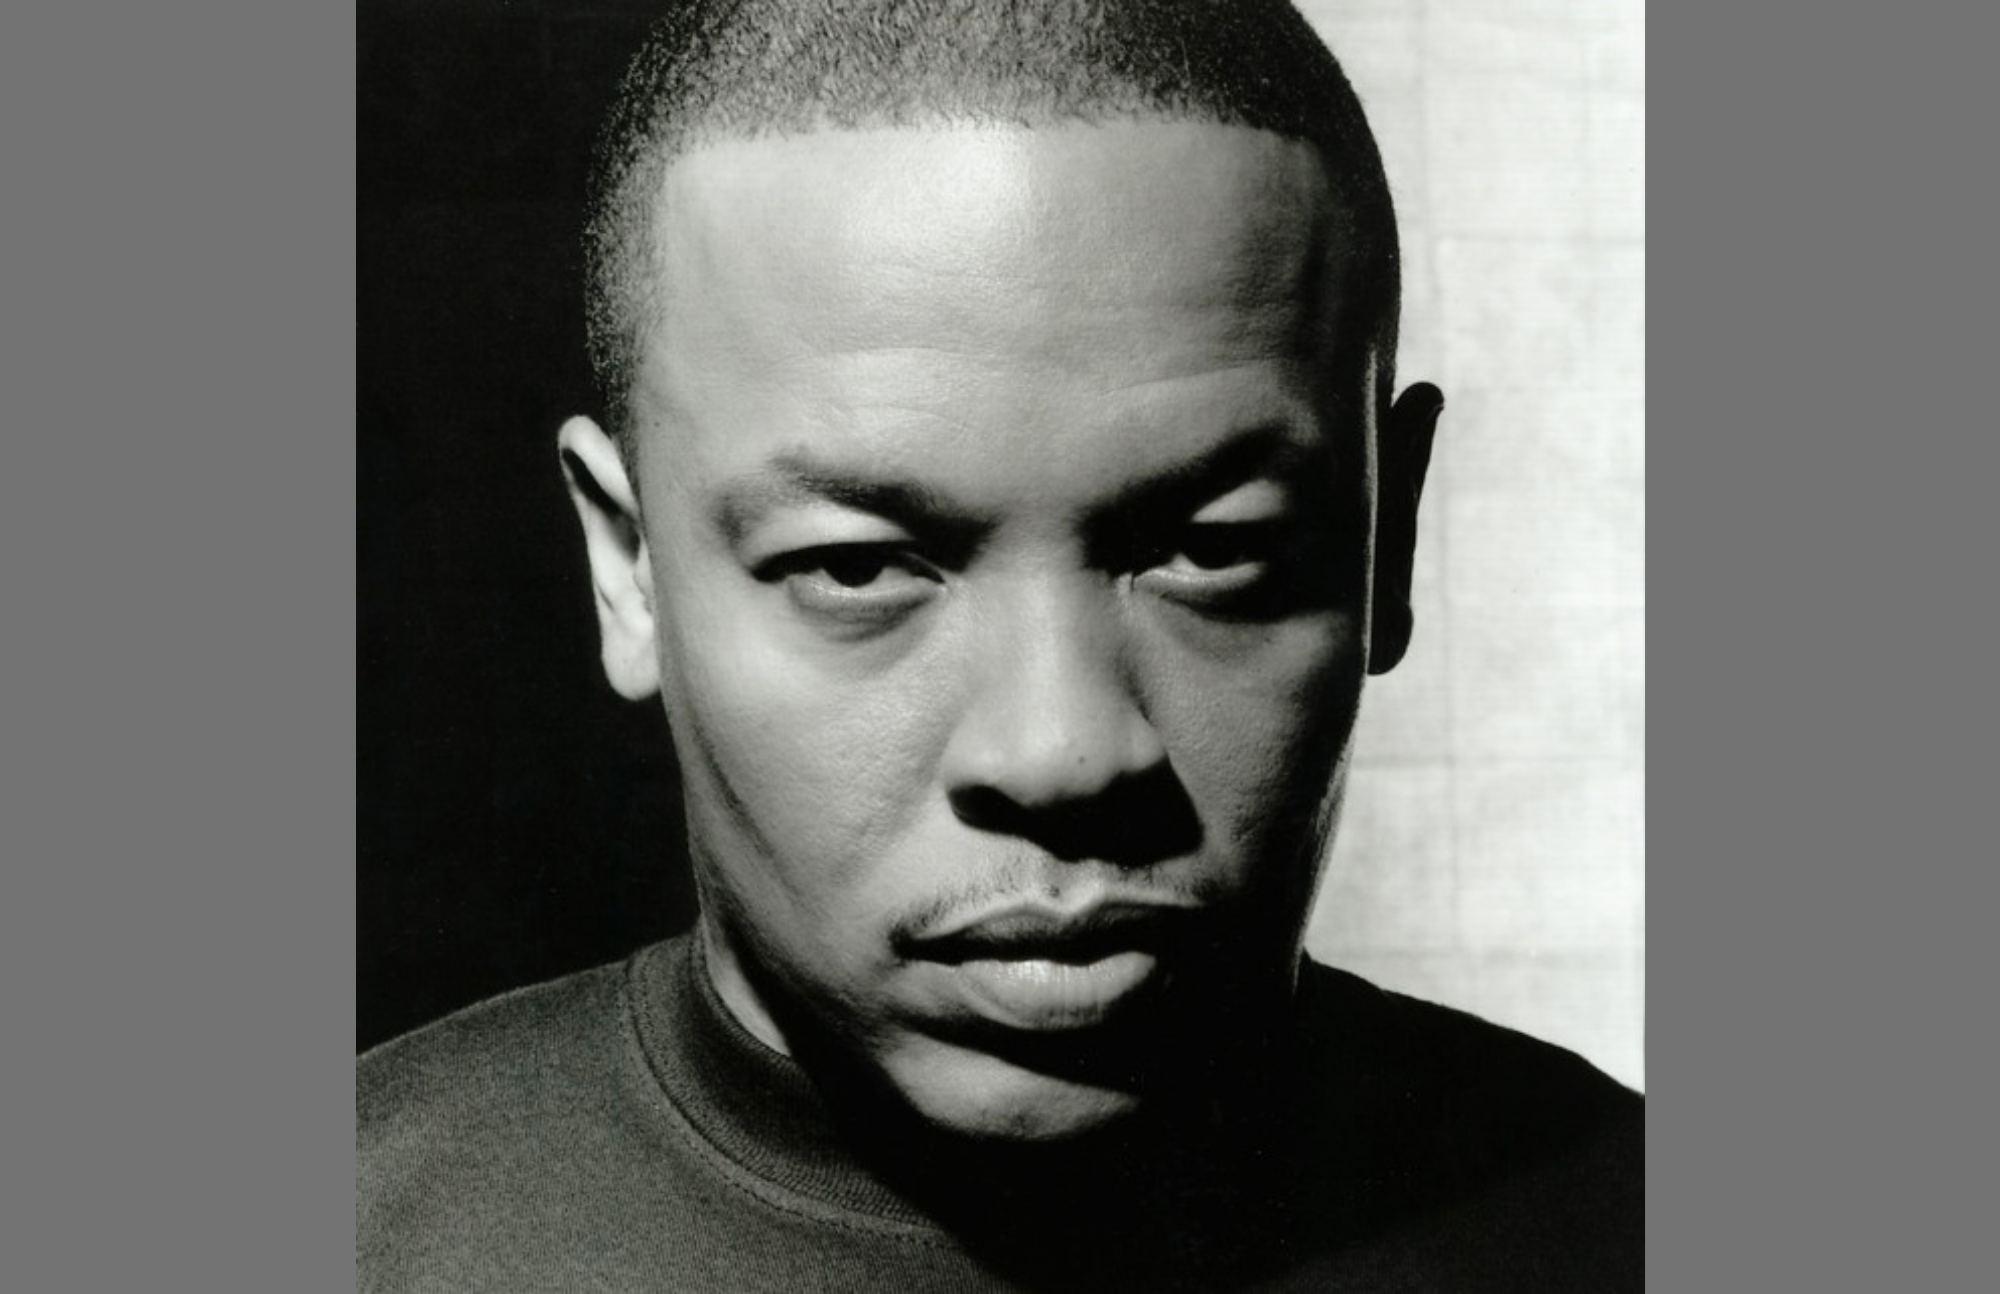 Dr. Dre looks fierce directly at the camera